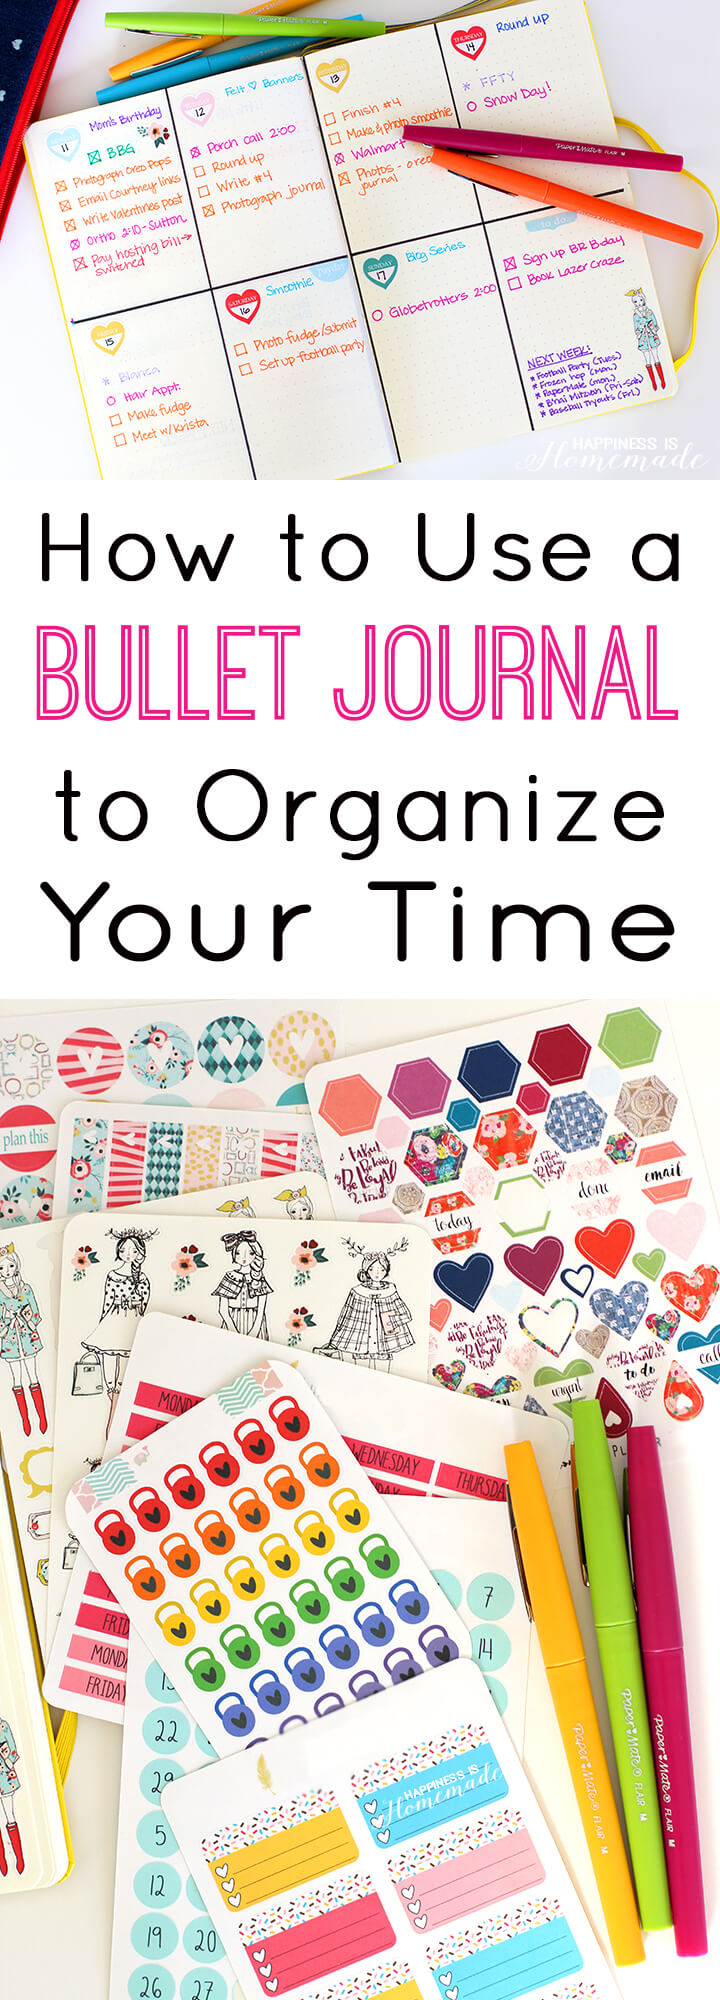 How to Use a Bullet Journal to Organize Your Time